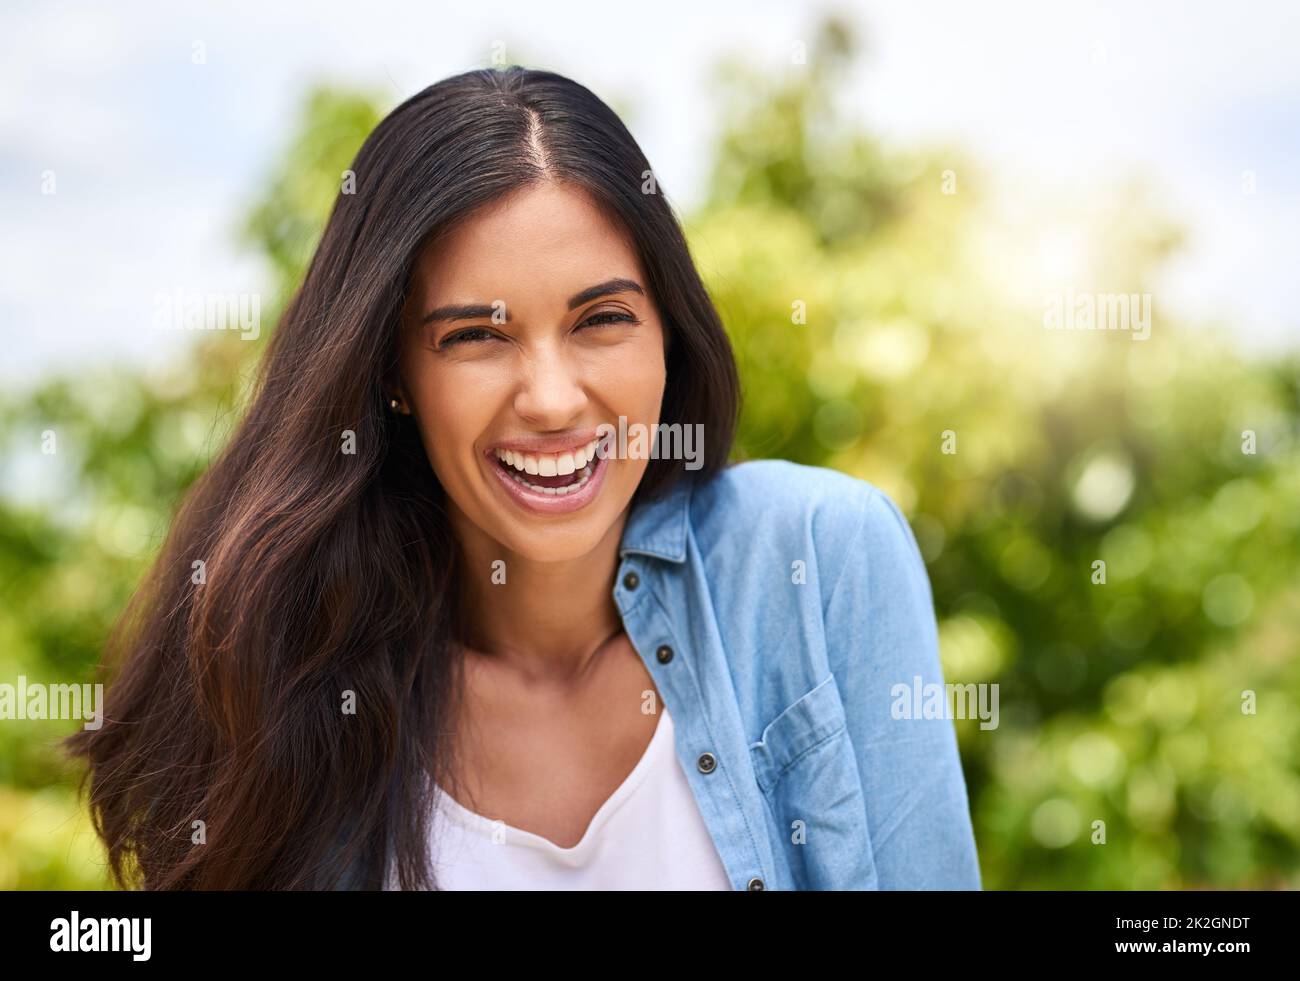 I love being outside. Cropped portrait of an attractive young woman standing outdoors. Stock Photo